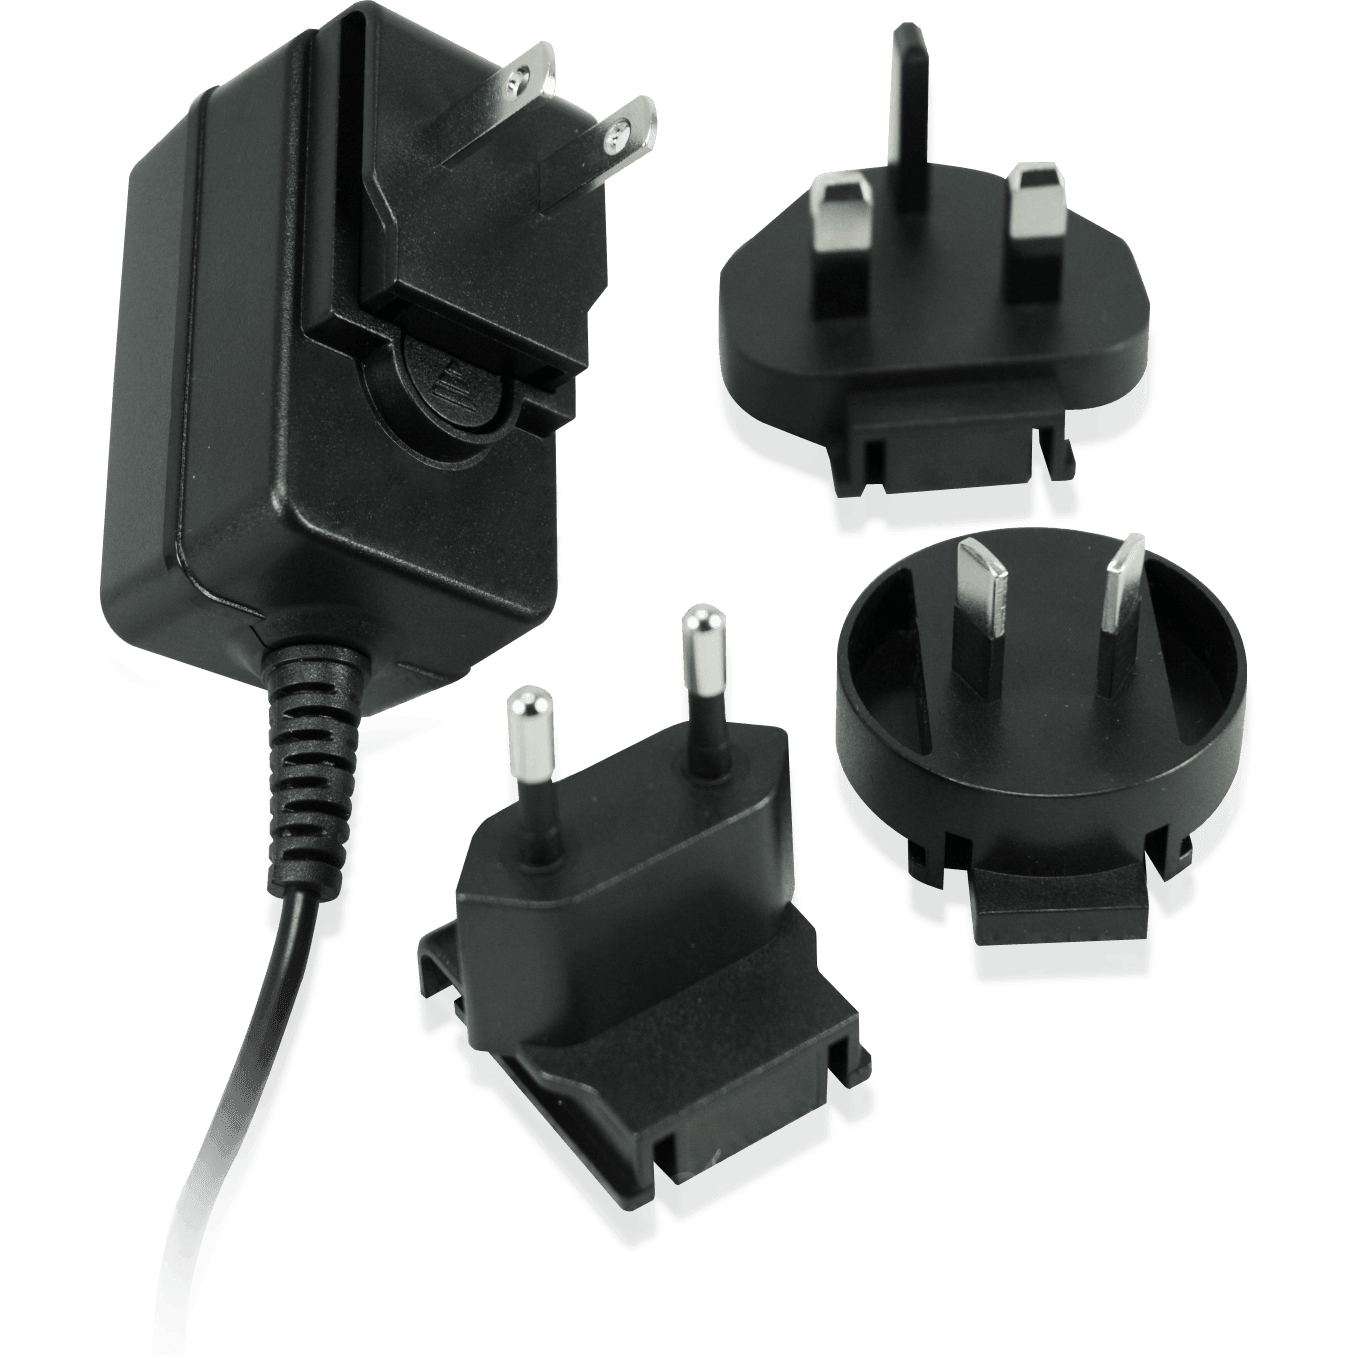 TC Helicon POWERPLUG 12 Universal Power Supply for TC Helicon Products with US, EU and UK Adaptors